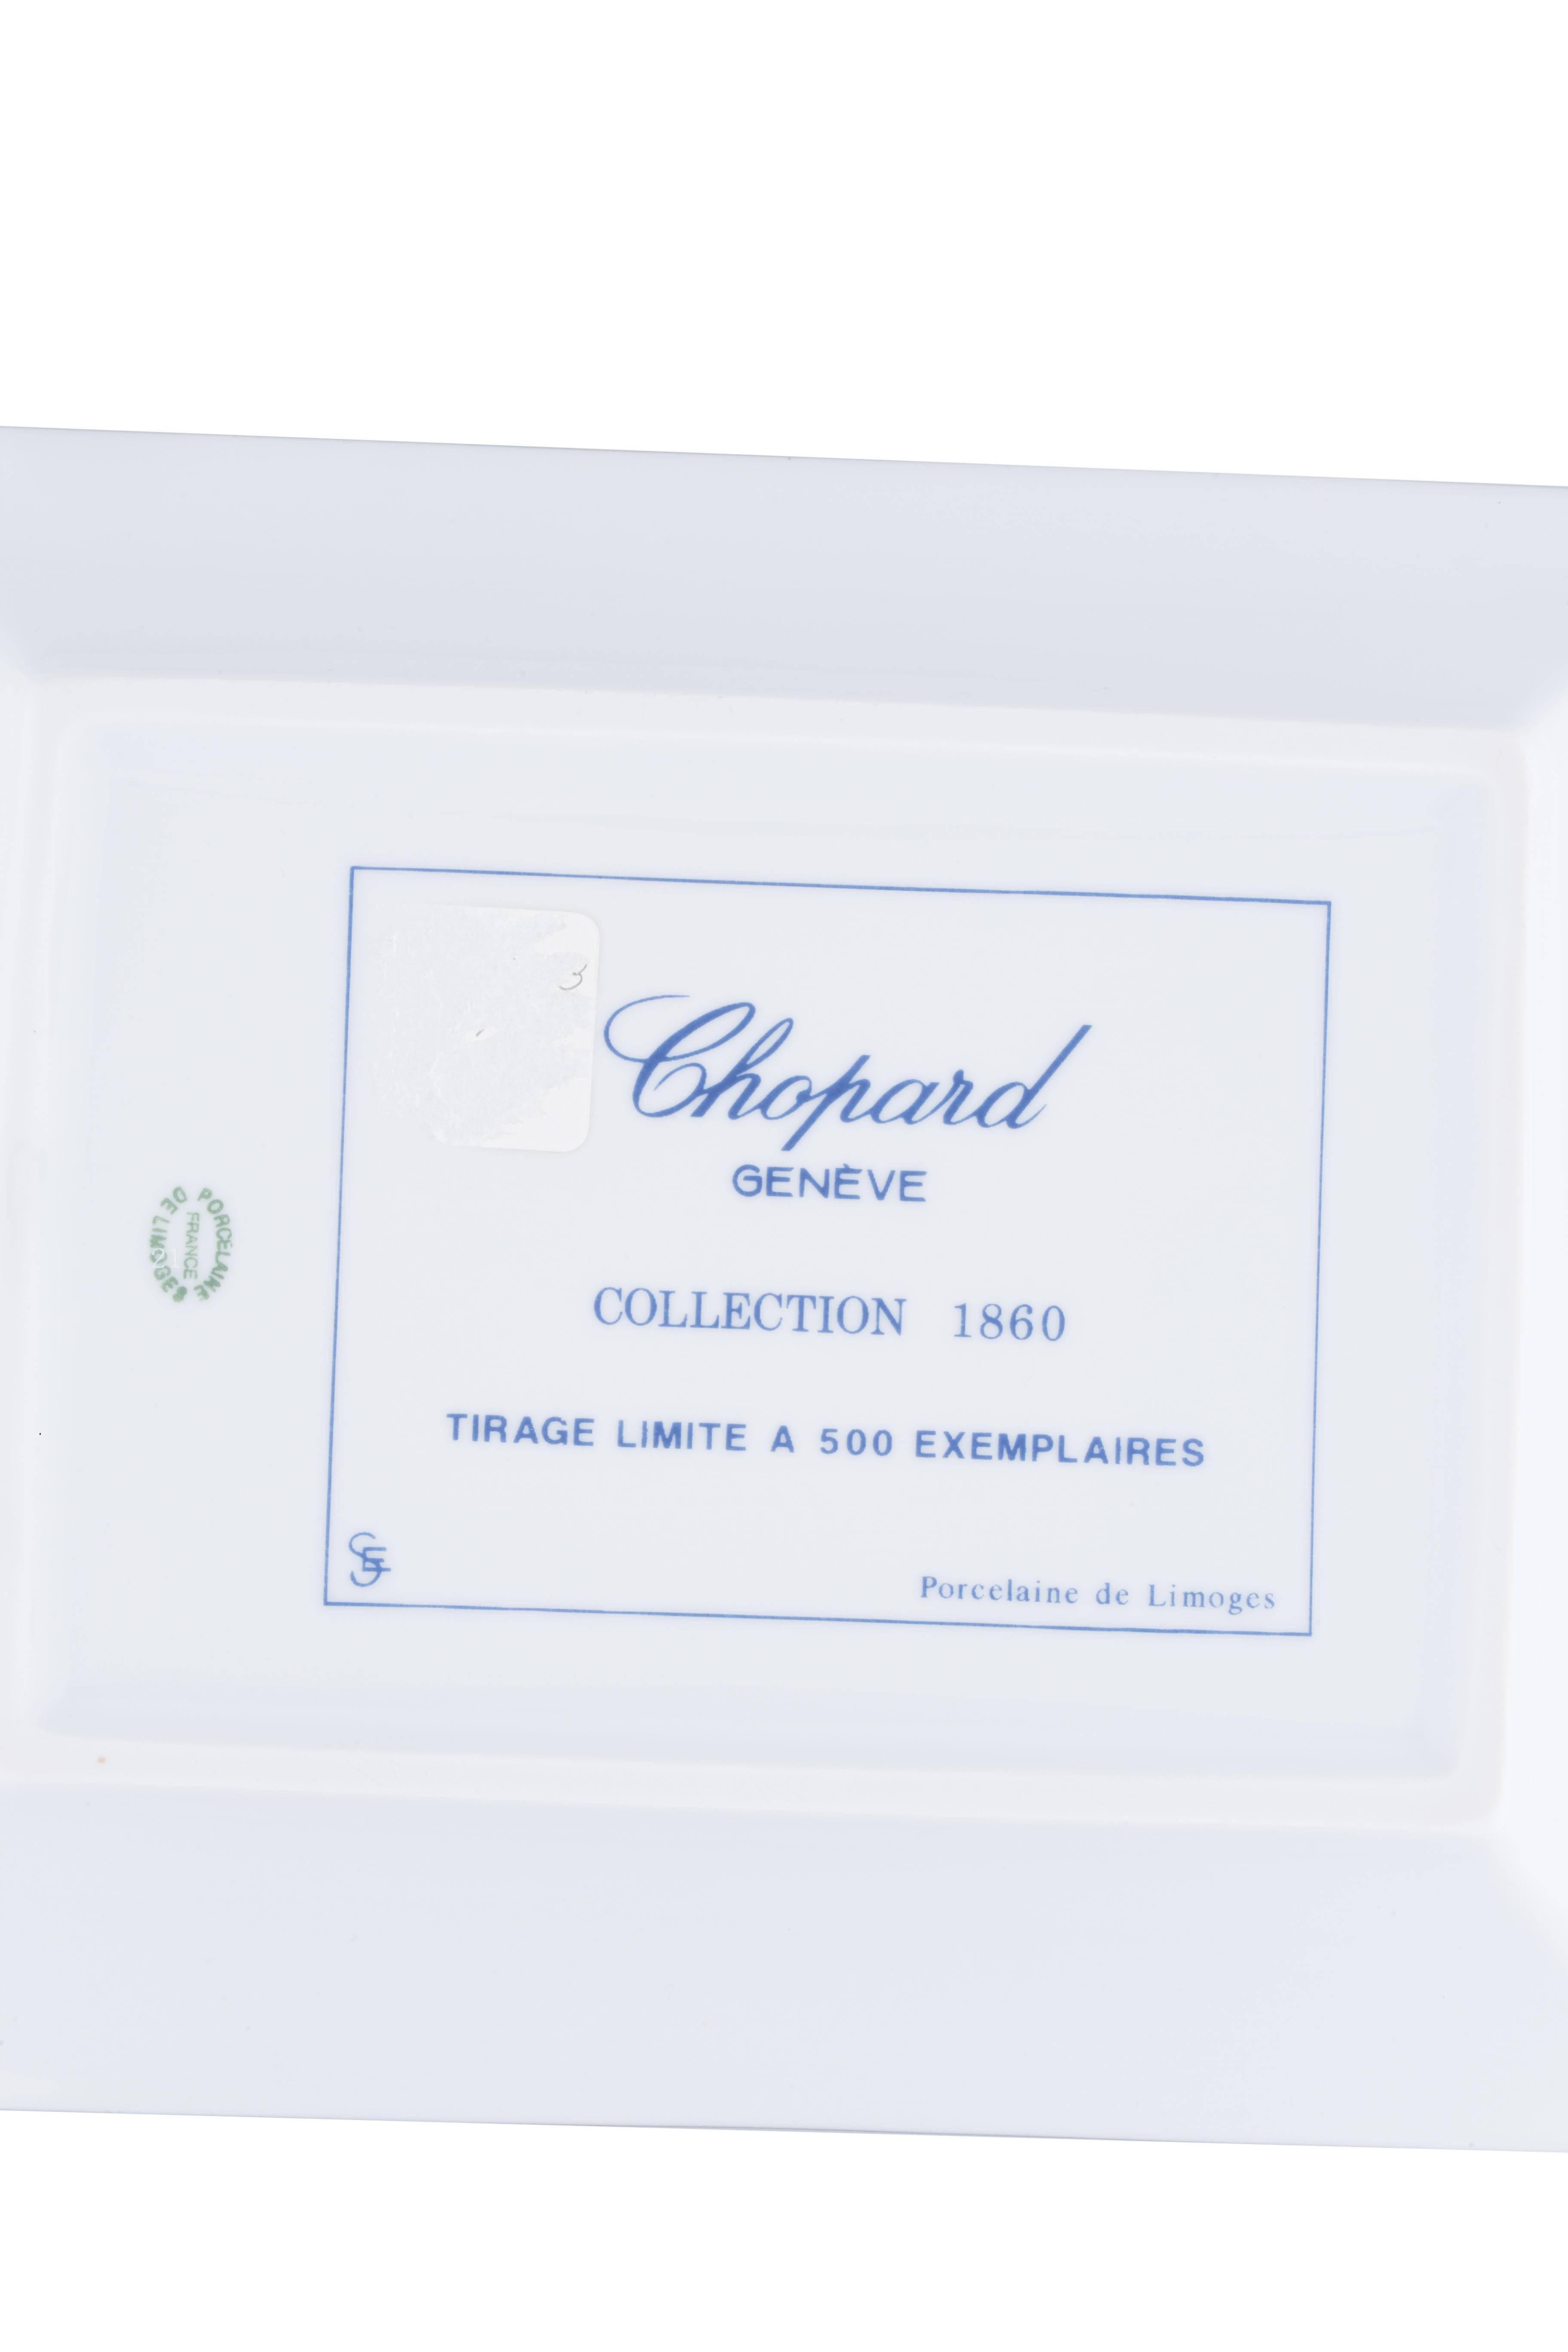 Gray Chopard Limited Edition Pocket Watch White Blue Silver Porcelain Ash Tray